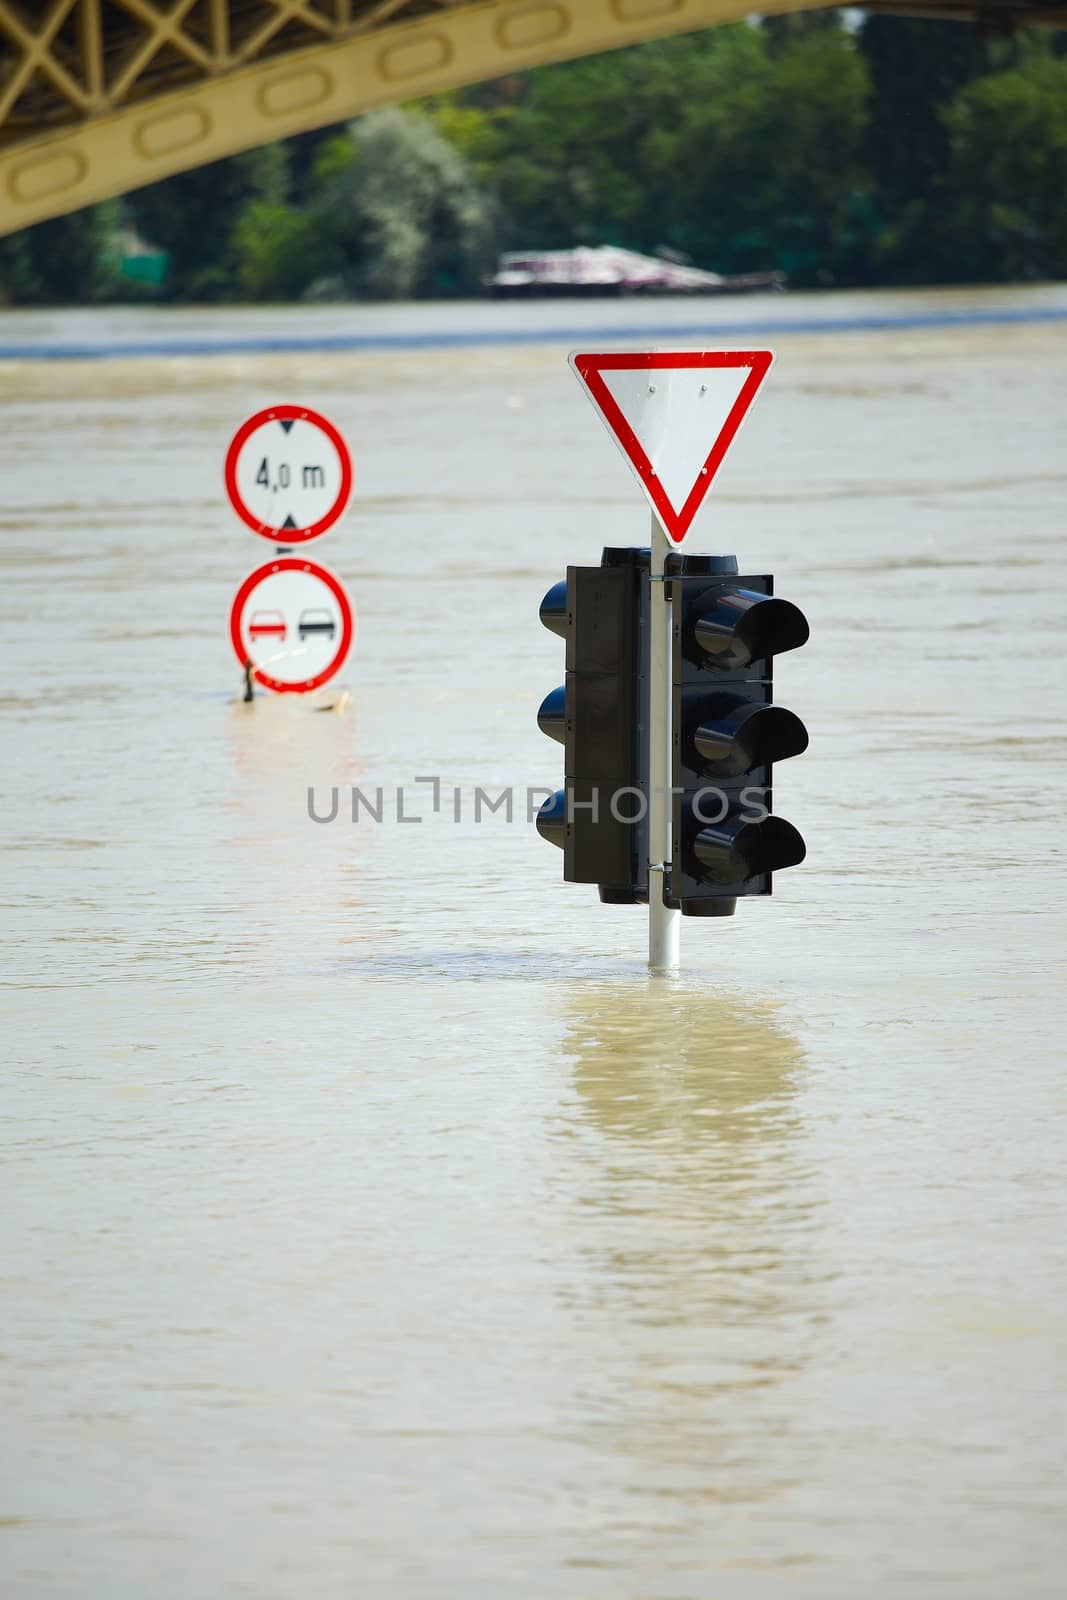 Flooded street n Budapest with traffic sign